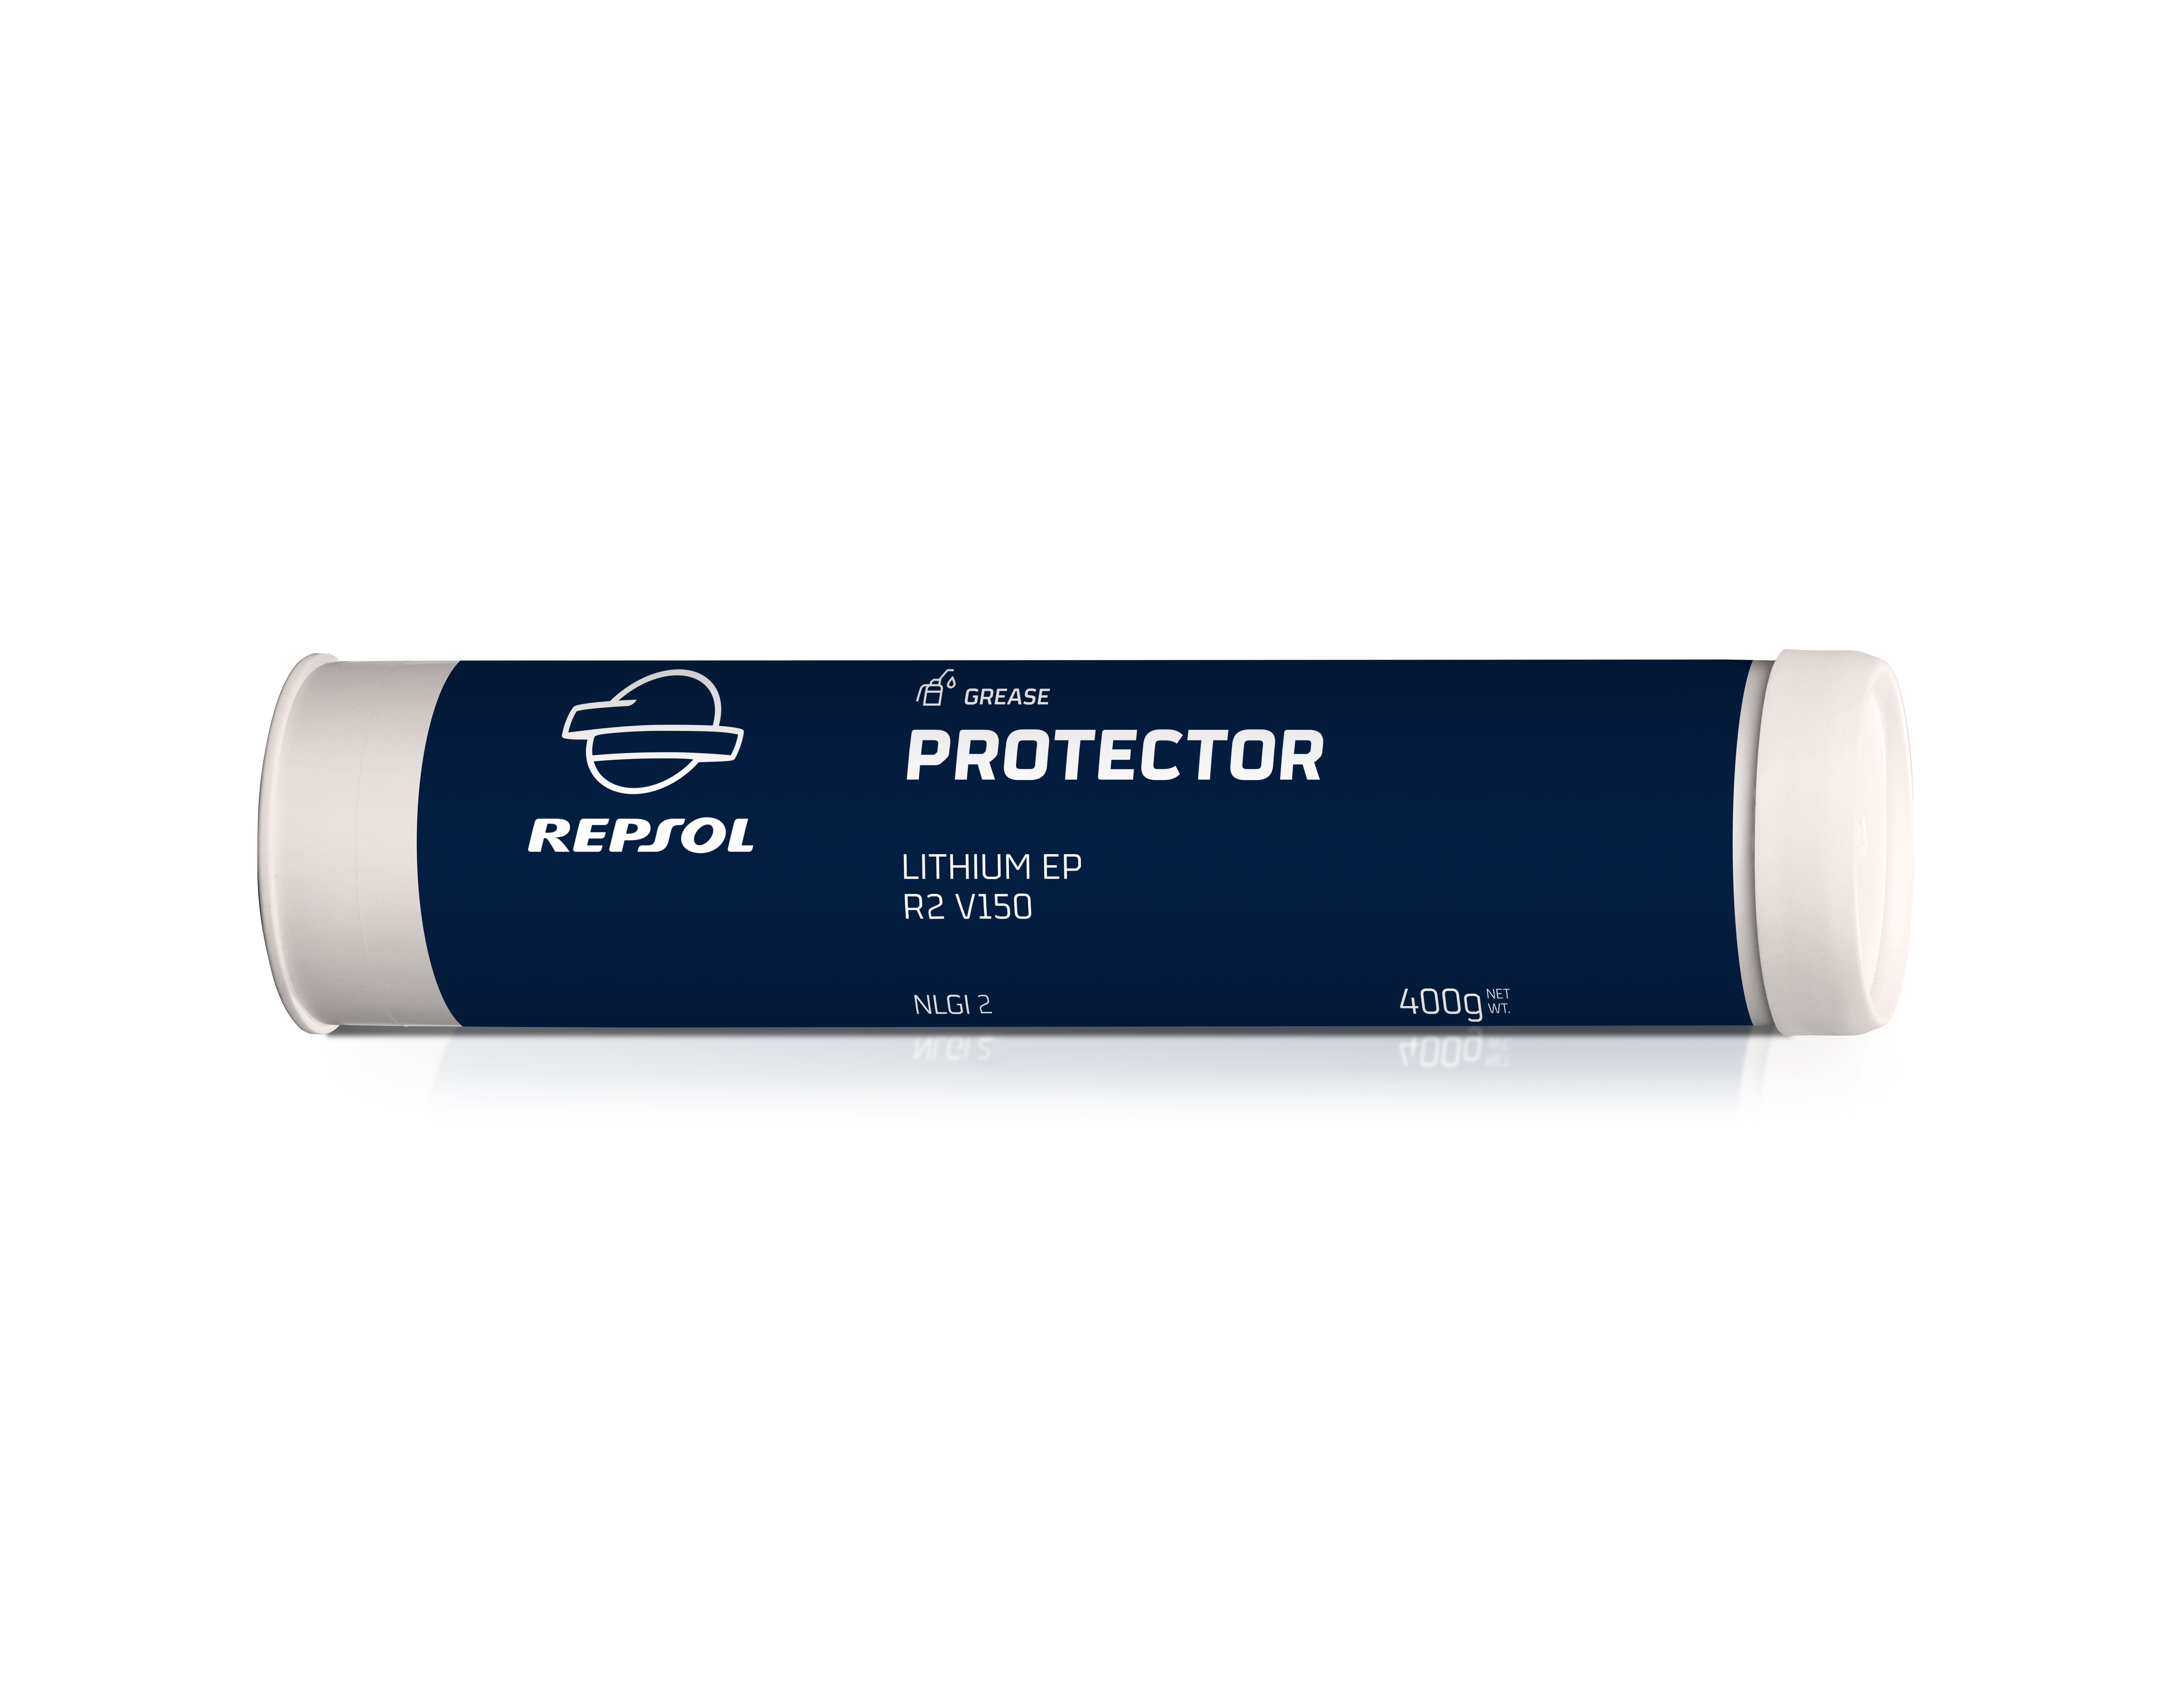 Gama Protector PROTECTOR LITHIUM EP R2 V150